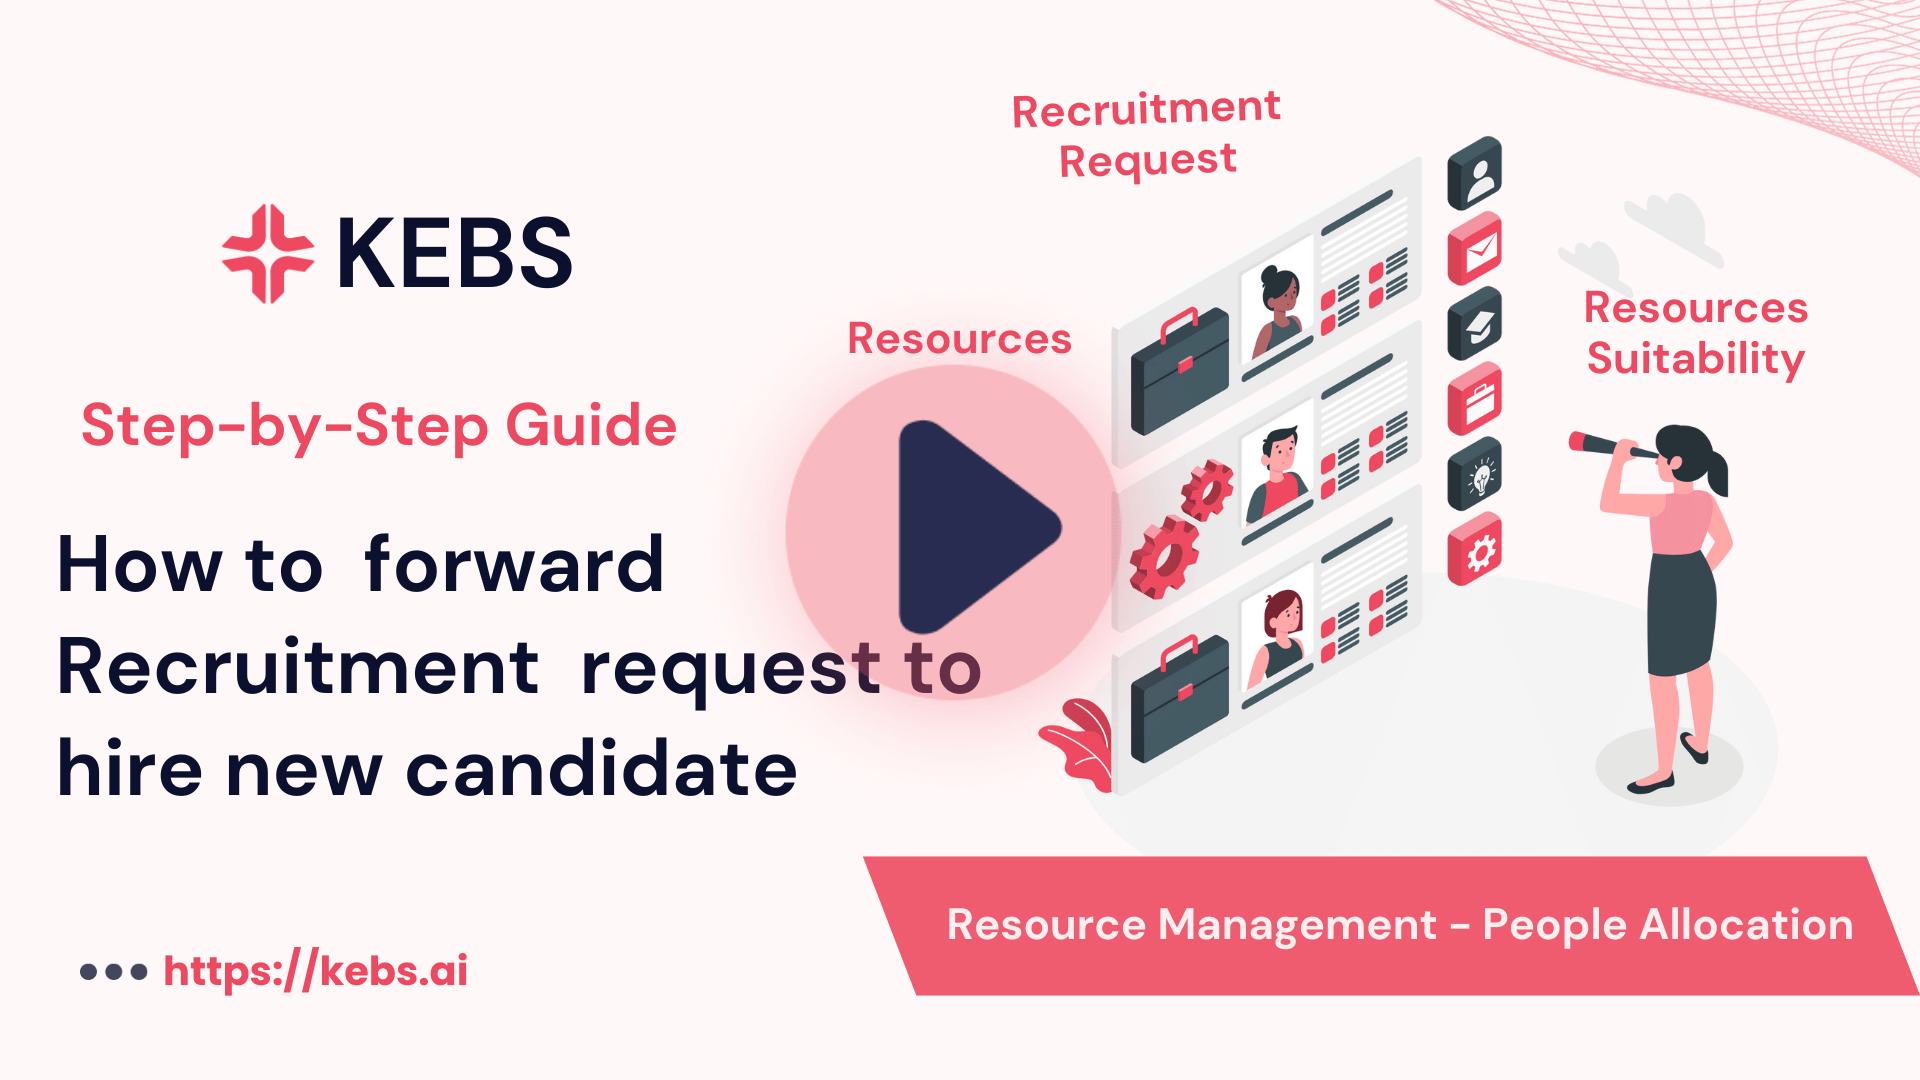 How to forward Recruitment request to hire new candidate